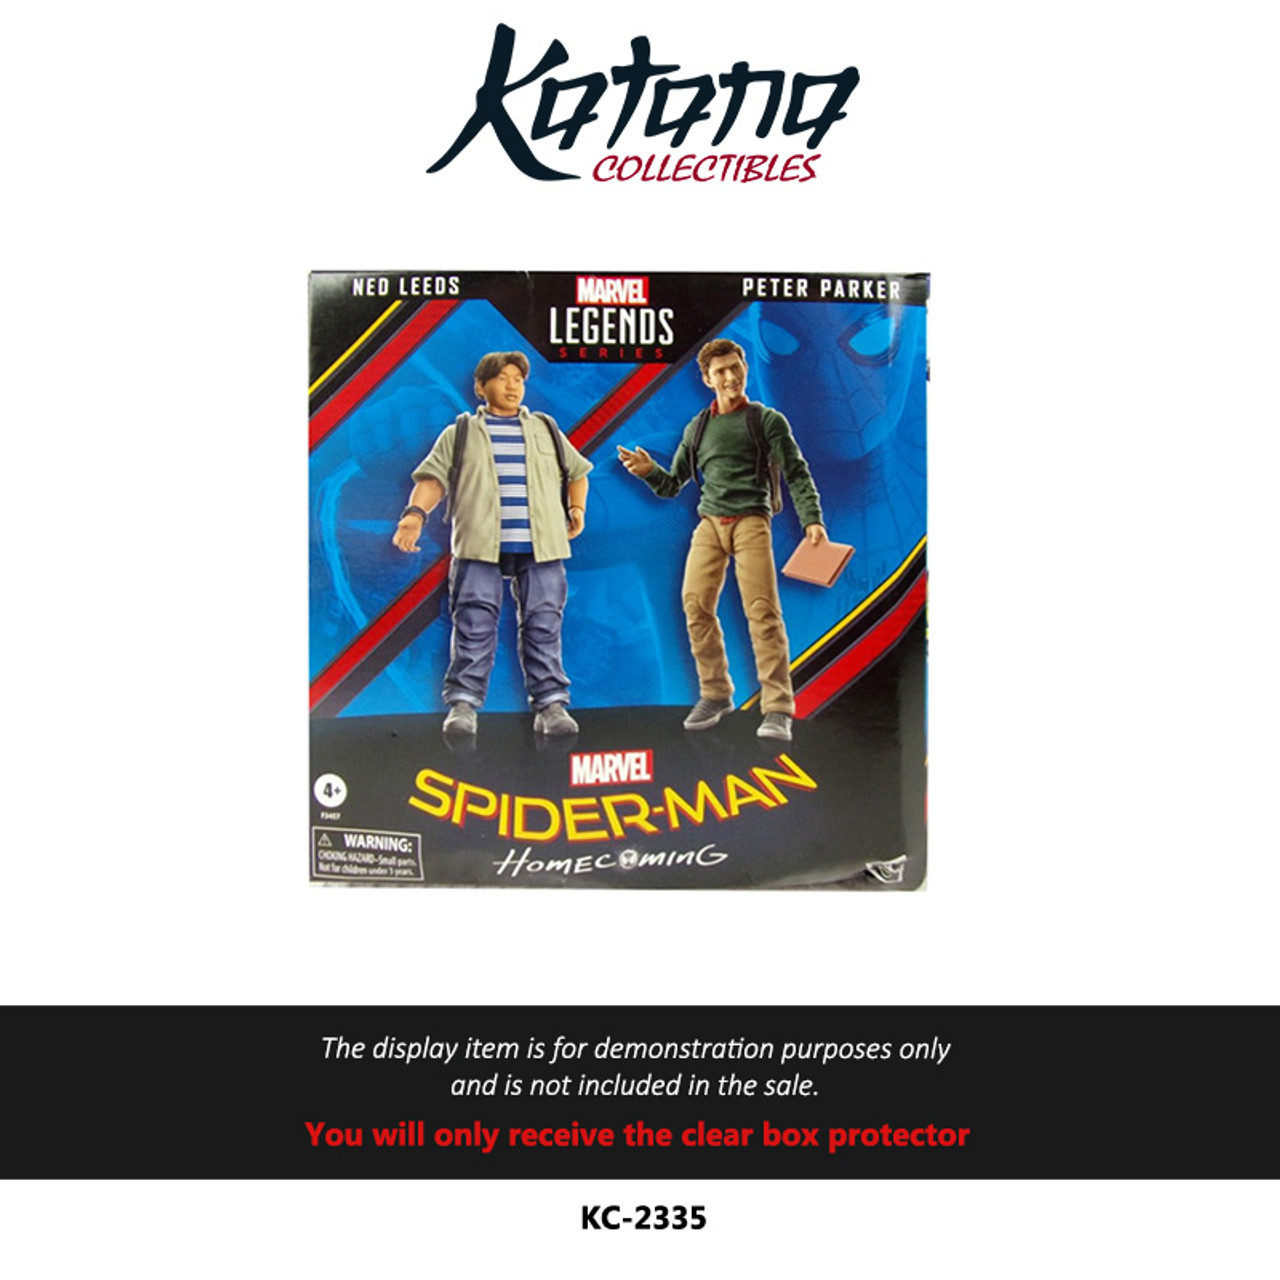 Katana Collectibles Protector For Marvel Legends Spiderman Homecoming